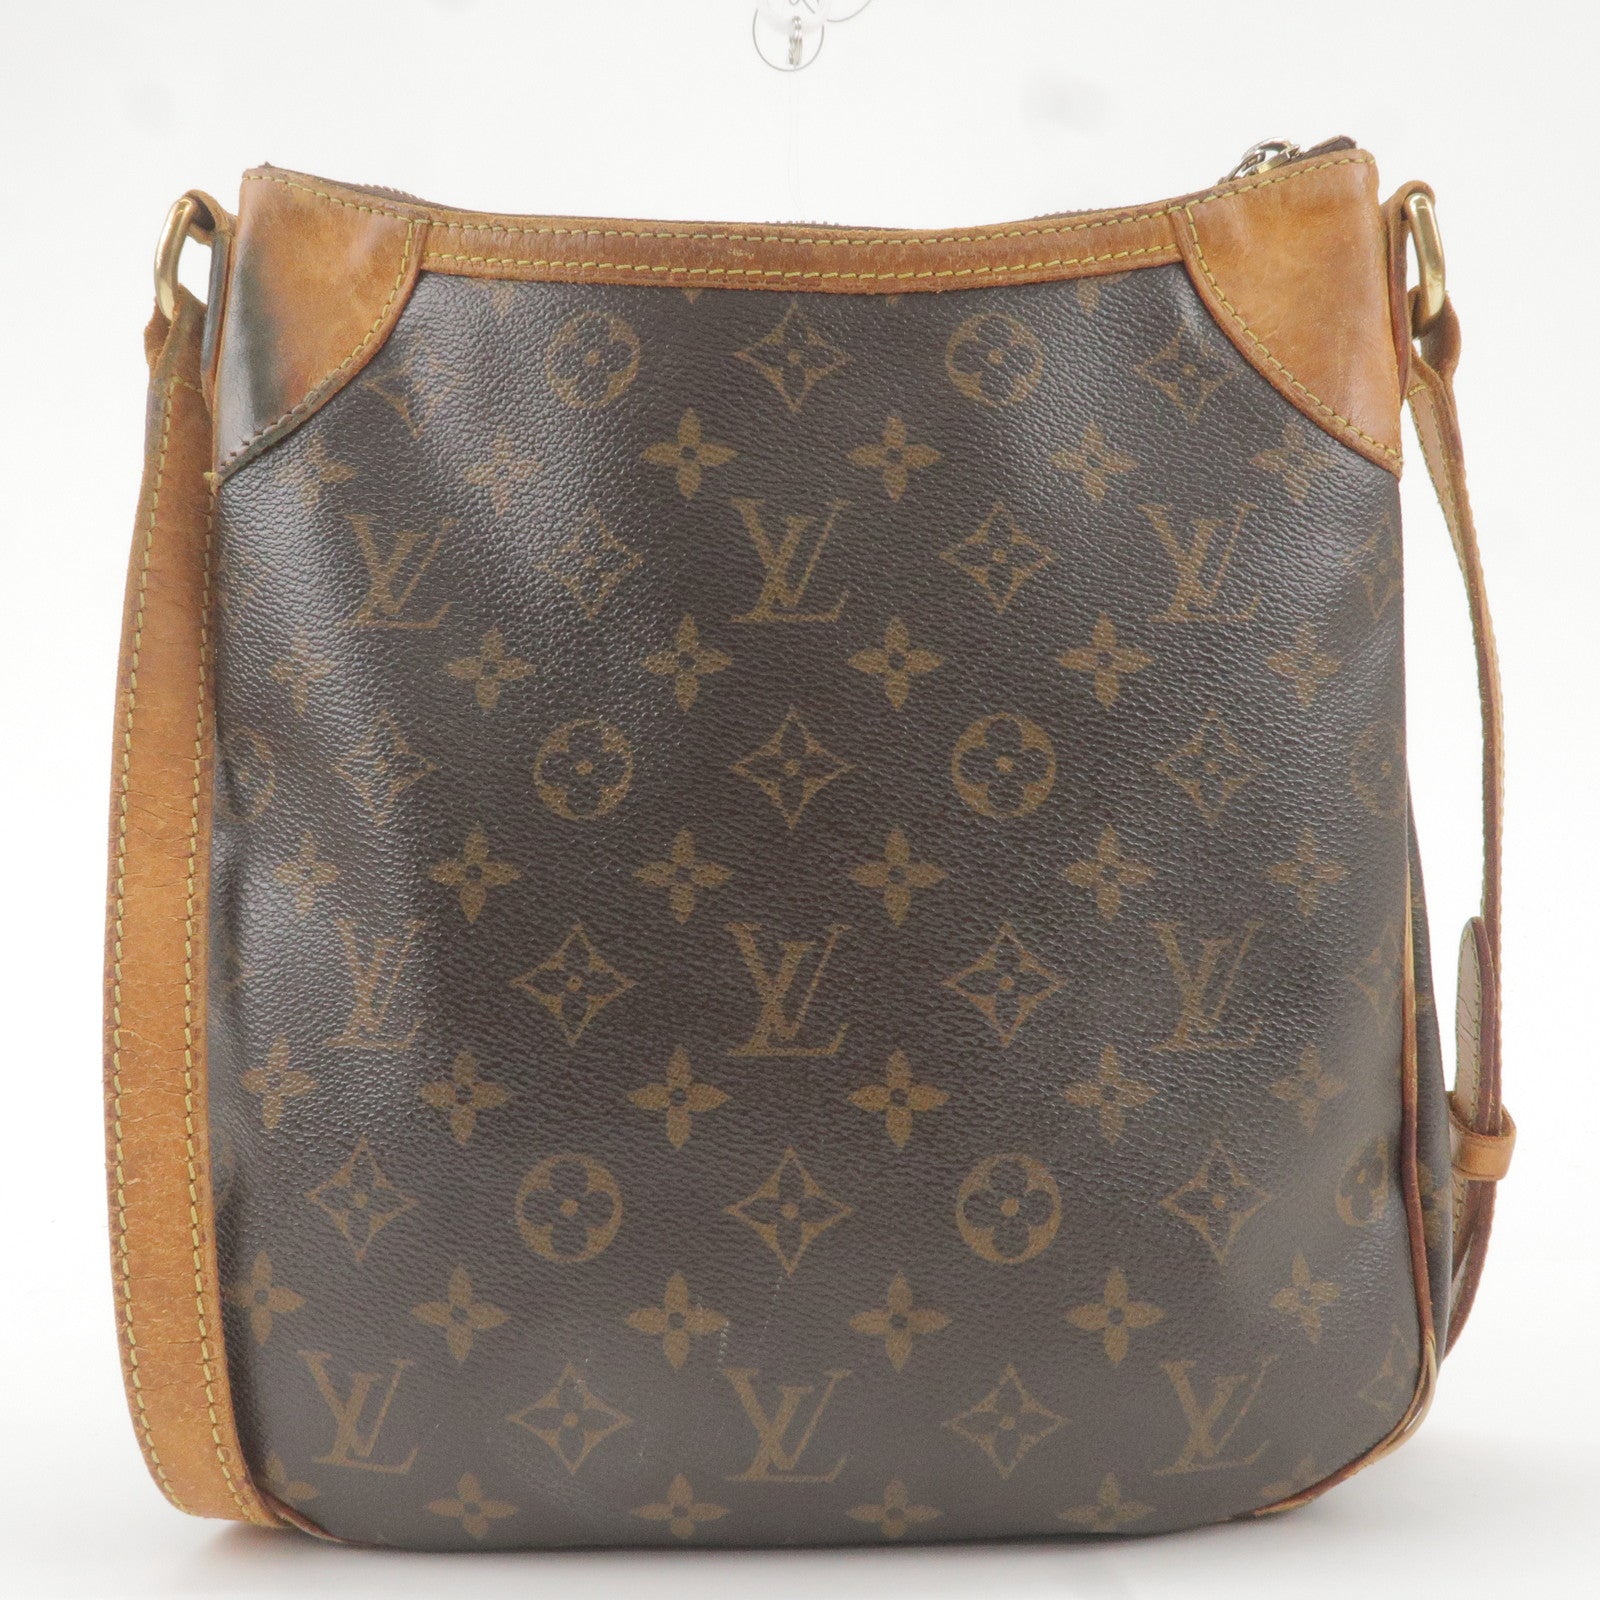 Buy Brand New & Pre-Owned Luxury LOUIS VUITTON ODEON PM M56390